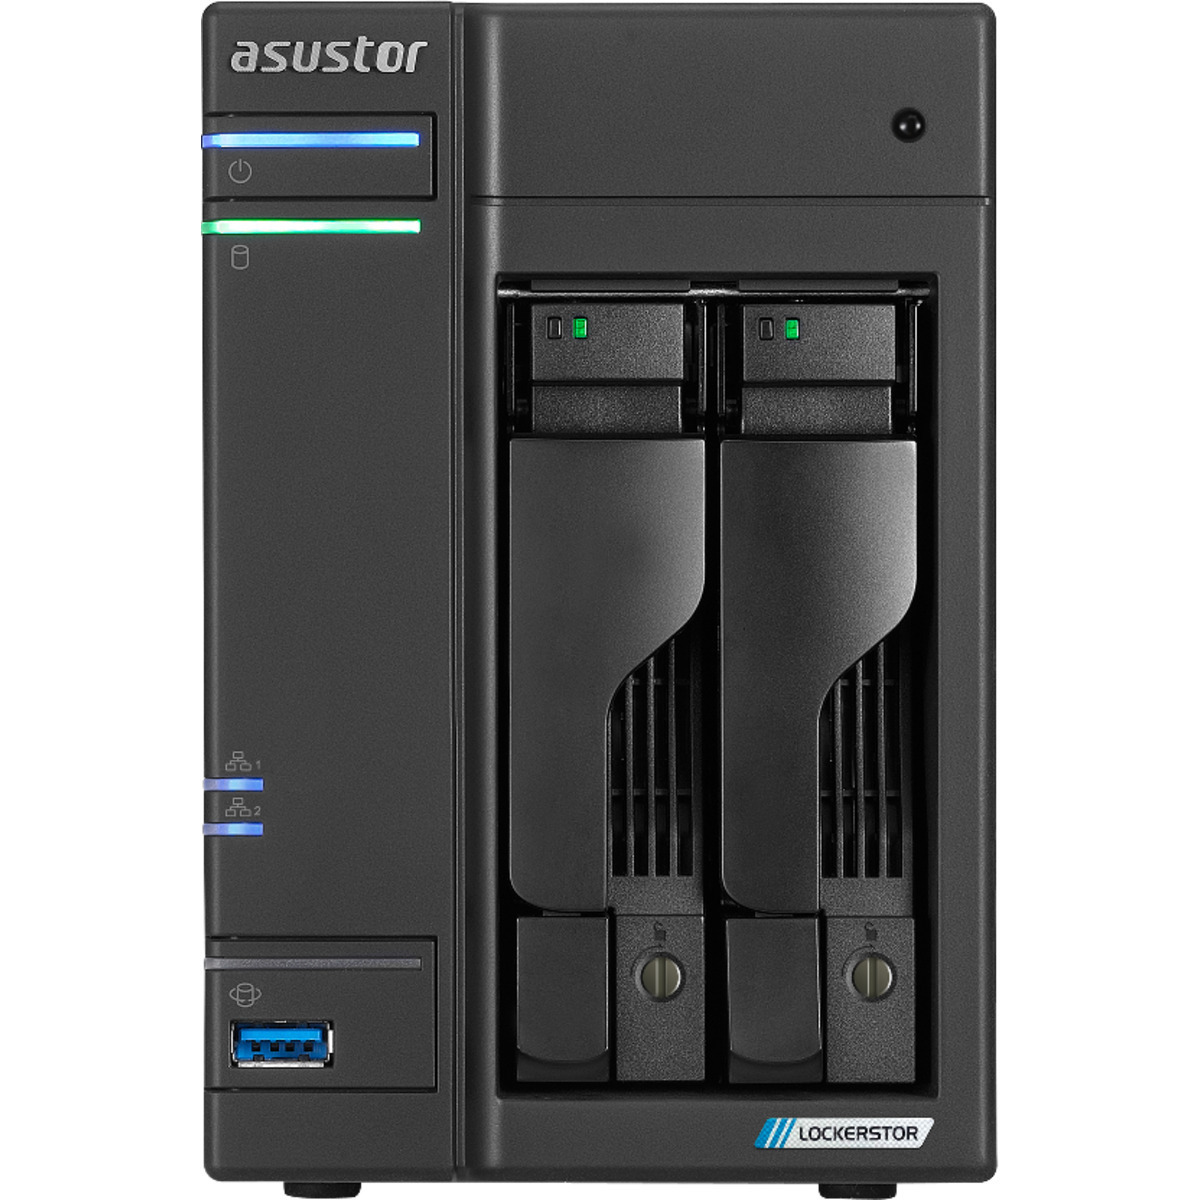 ASUSTOR LOCKERSTOR 2 Gen2 AS6702T 20tb 2-Bay Desktop Multimedia / Power User / Business NAS - Network Attached Storage Device 2x10tb Seagate EXOS X18 ST10000NM018G 3.5 7200rpm SATA 6Gb/s HDD ENTERPRISE Class Drives Installed - Burn-In Tested - FREE RAM UPGRADE LOCKERSTOR 2 Gen2 AS6702T